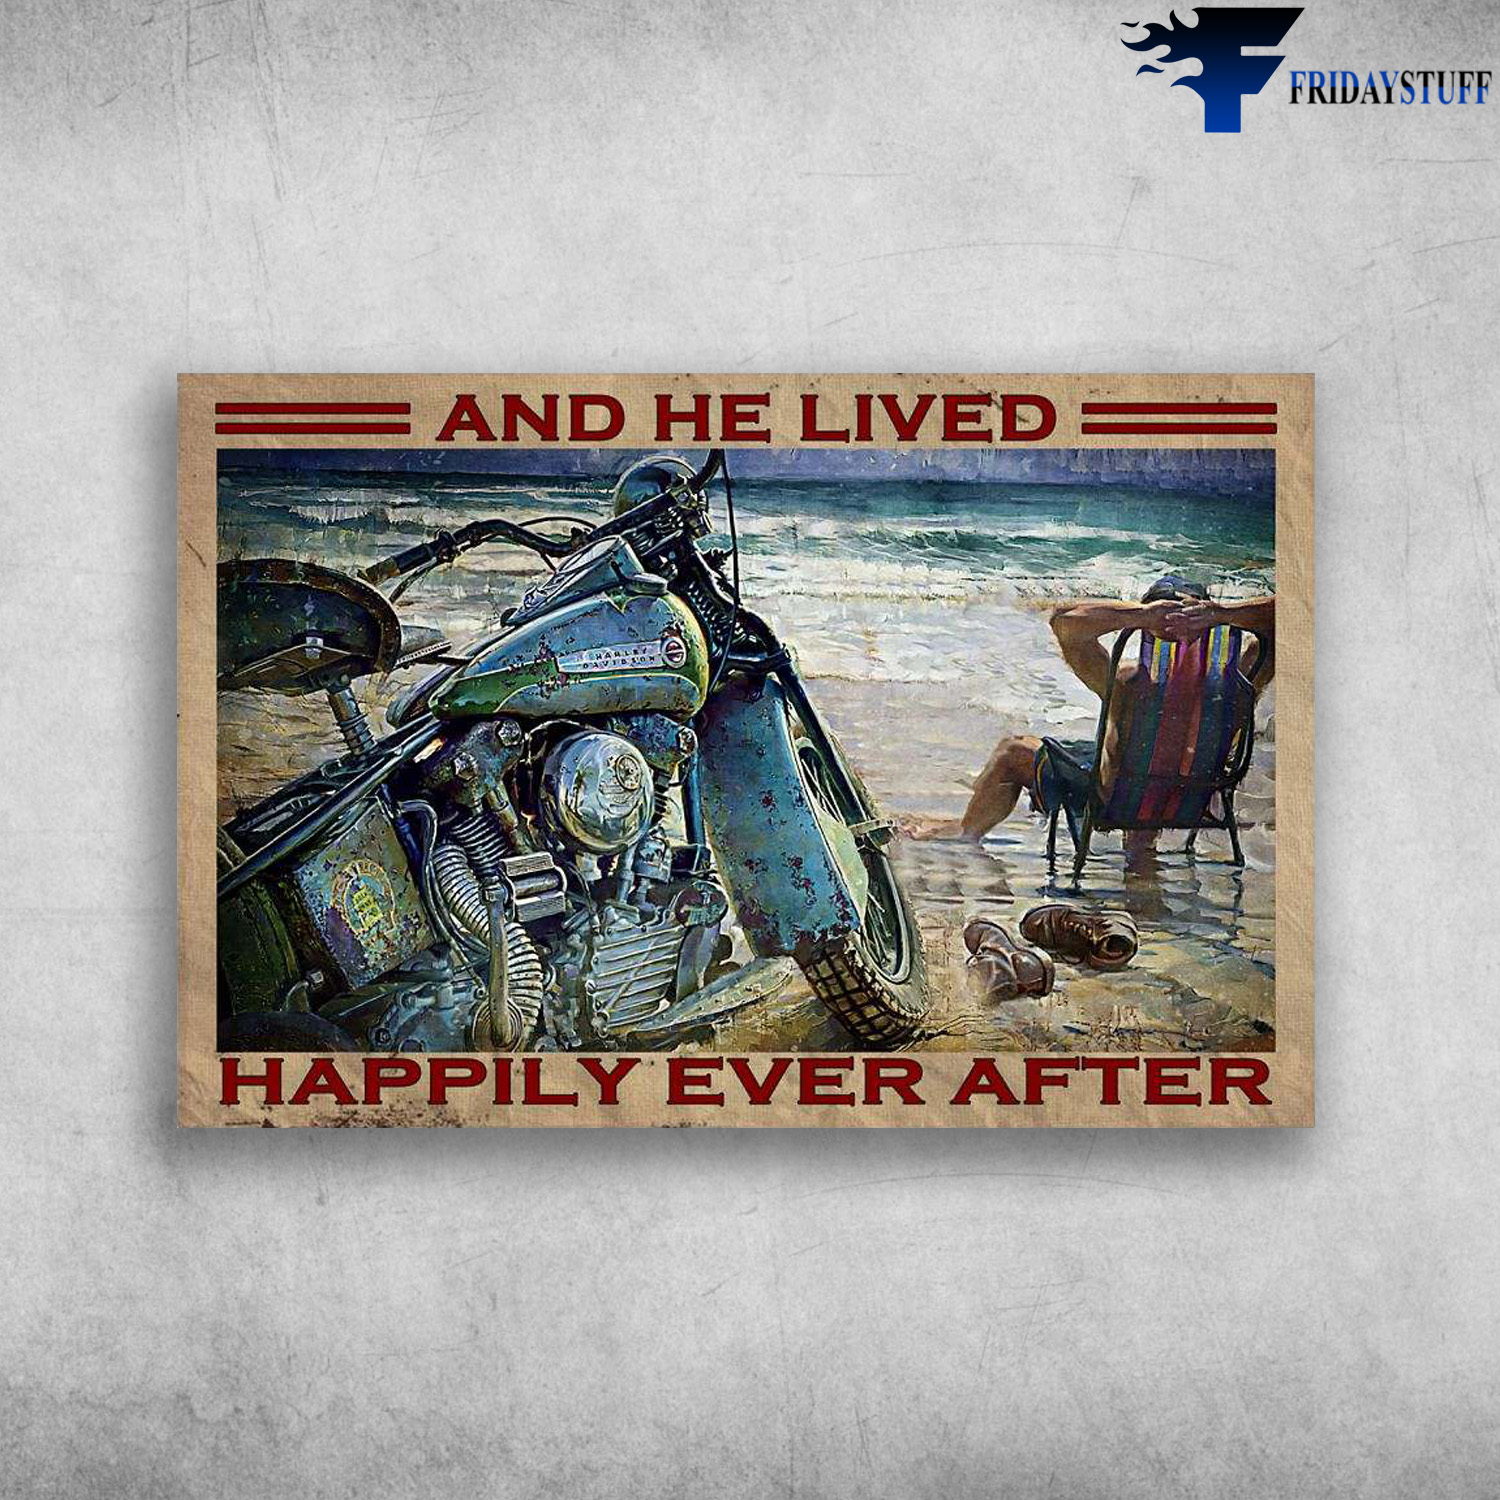 Beach Relax, Motorcycle Man - And He Lived, Happily Ever After